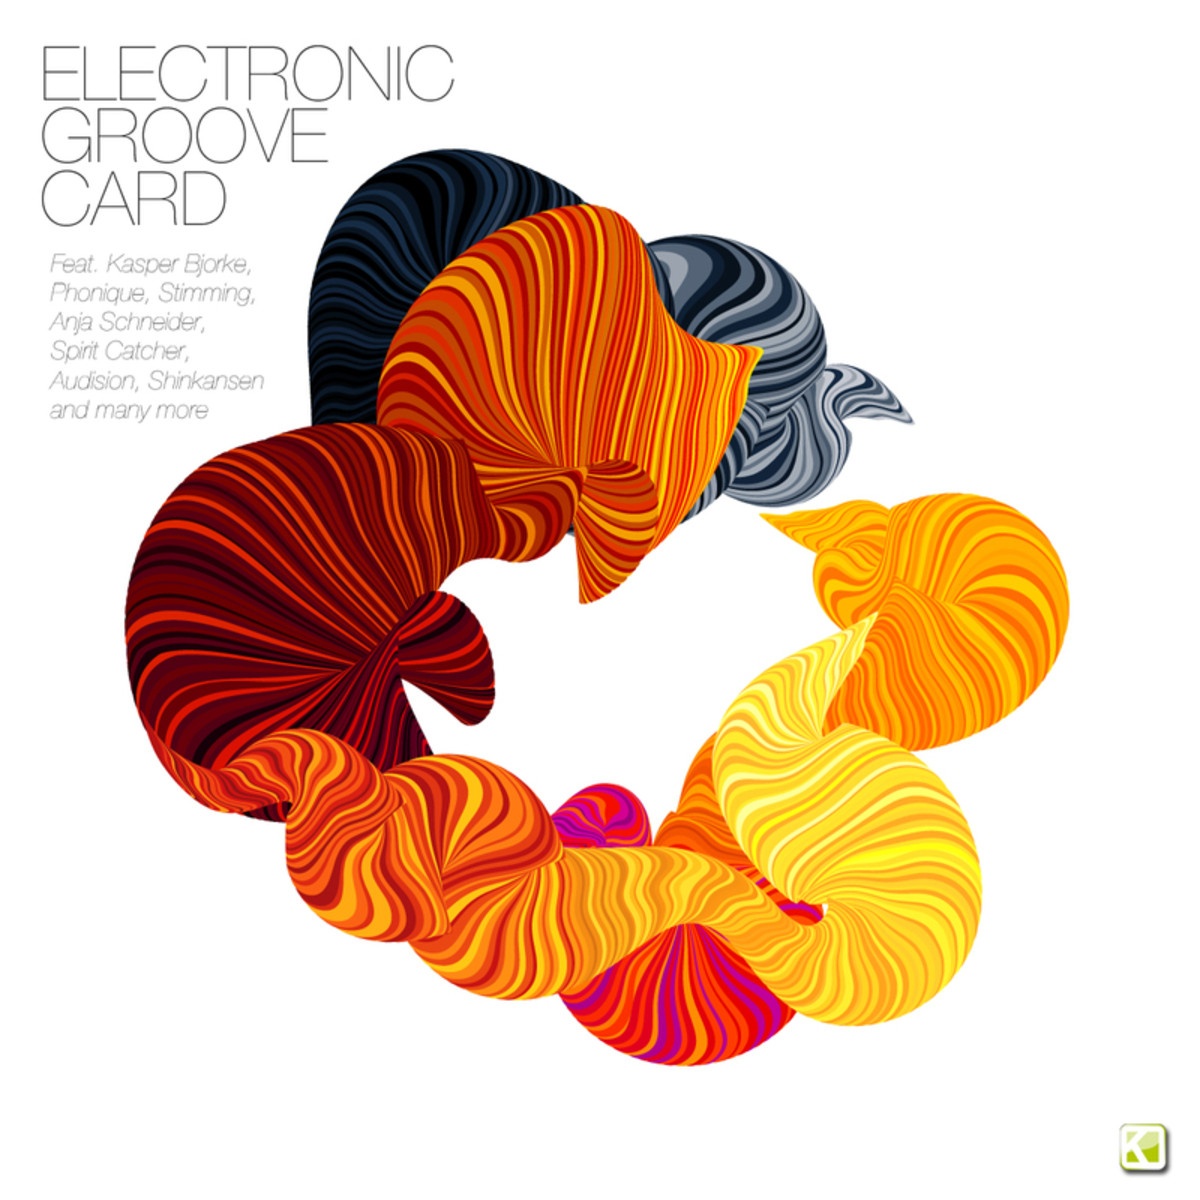 Electronic Groove CARD